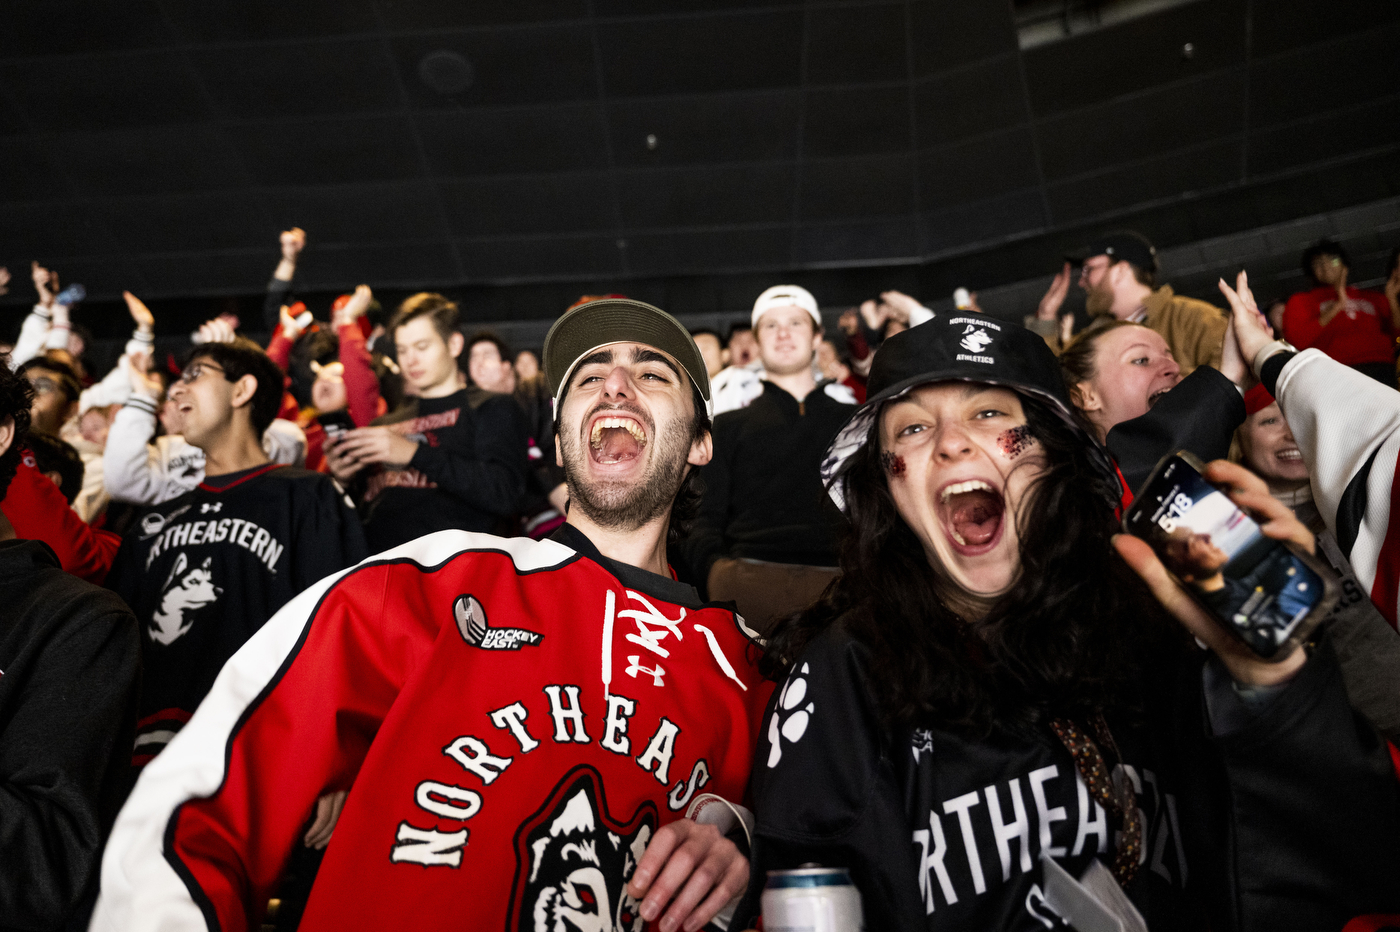 Students cheering for the Beanpot.